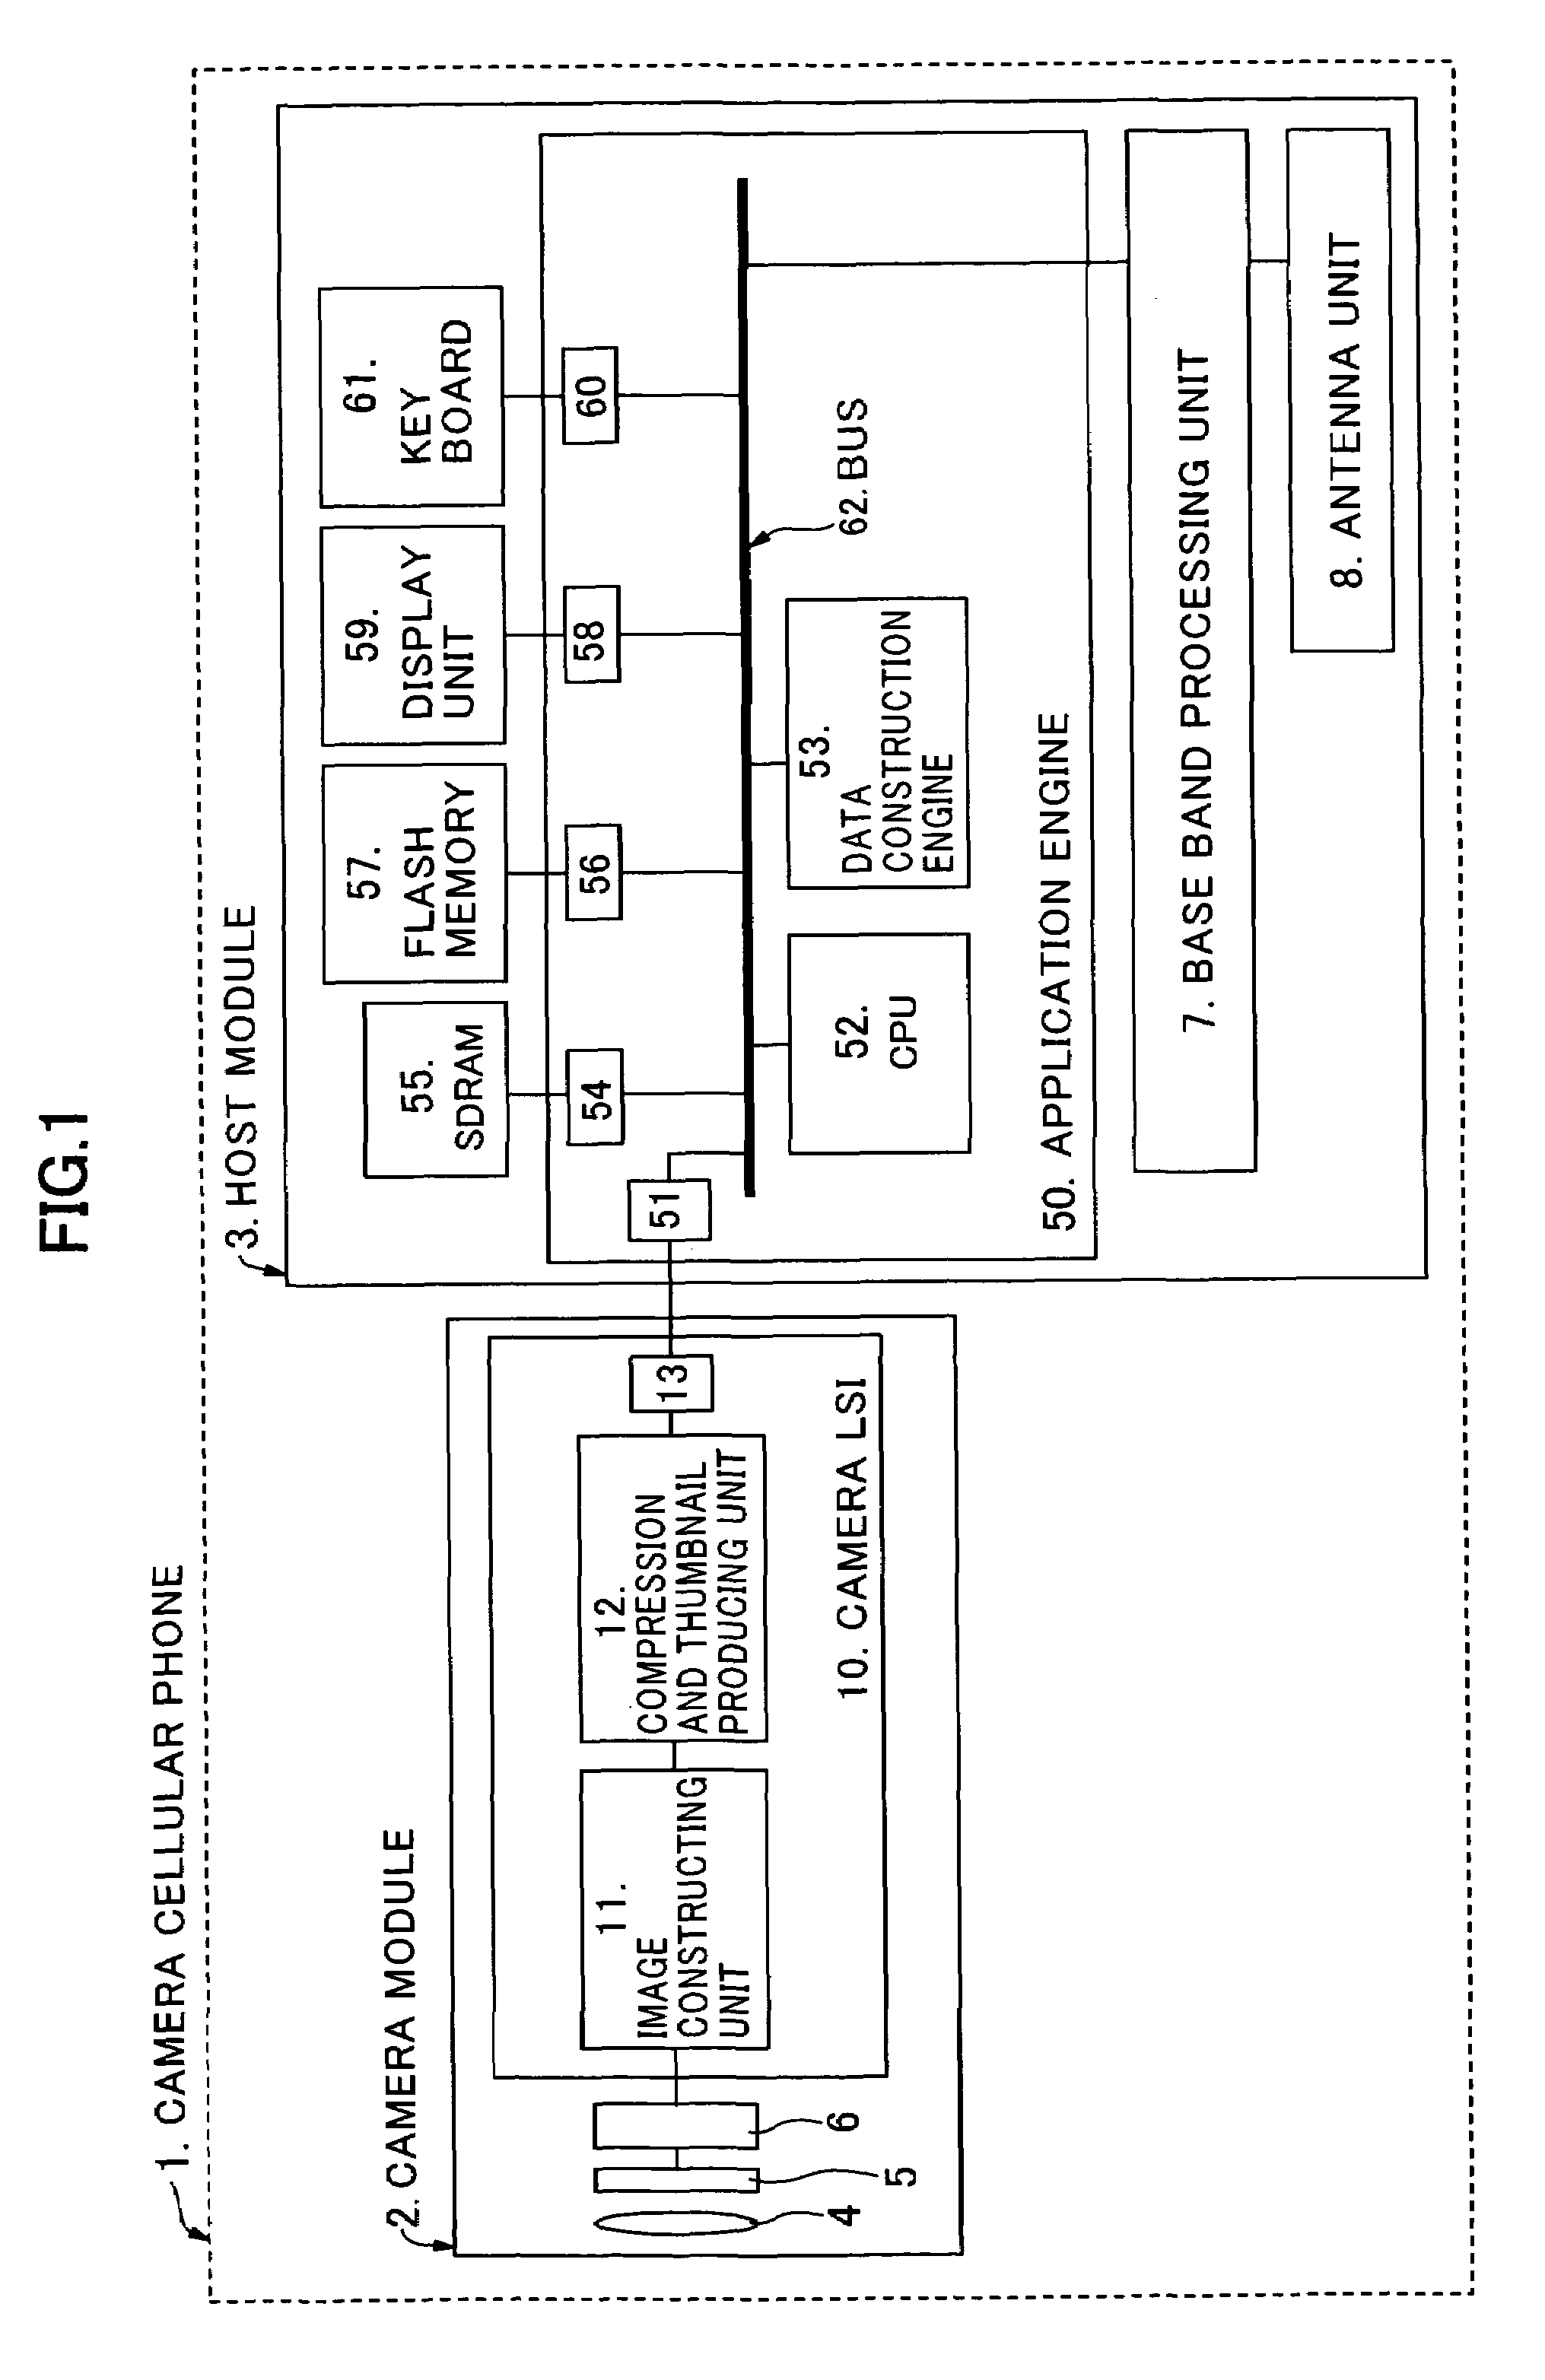 Electronic device for compressing image data and producing thumbnail image, image processing apparatus, and data structure